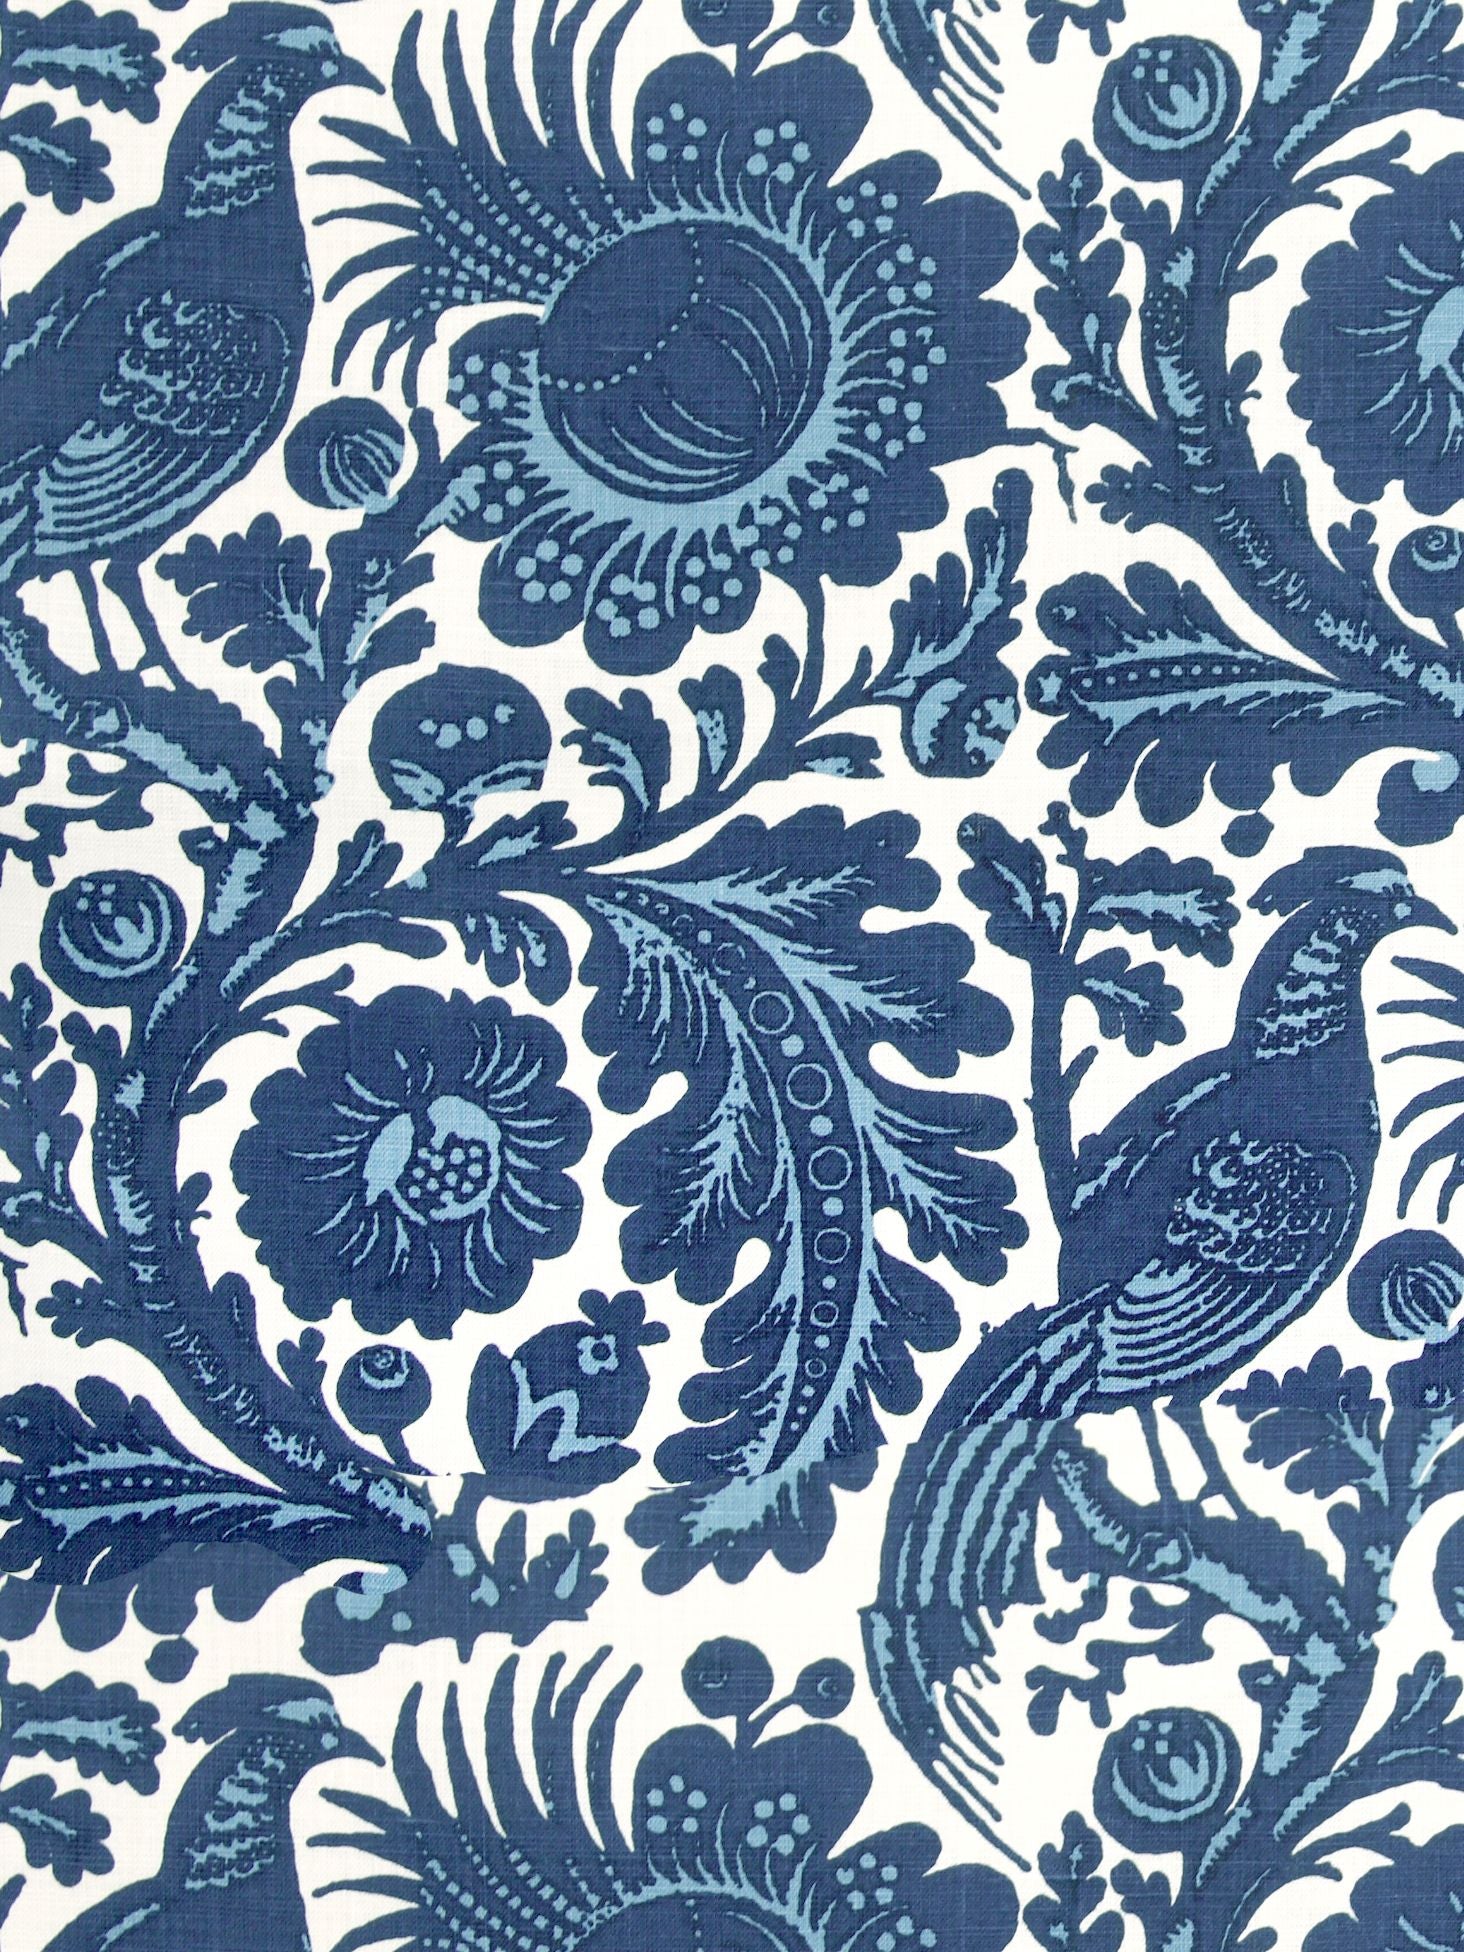 Spoleto Outdoor fabric in light and dark blue on white color - pattern number SC 000136389 - by Scalamandre in the Scalamandre Fabrics Book 1 collection